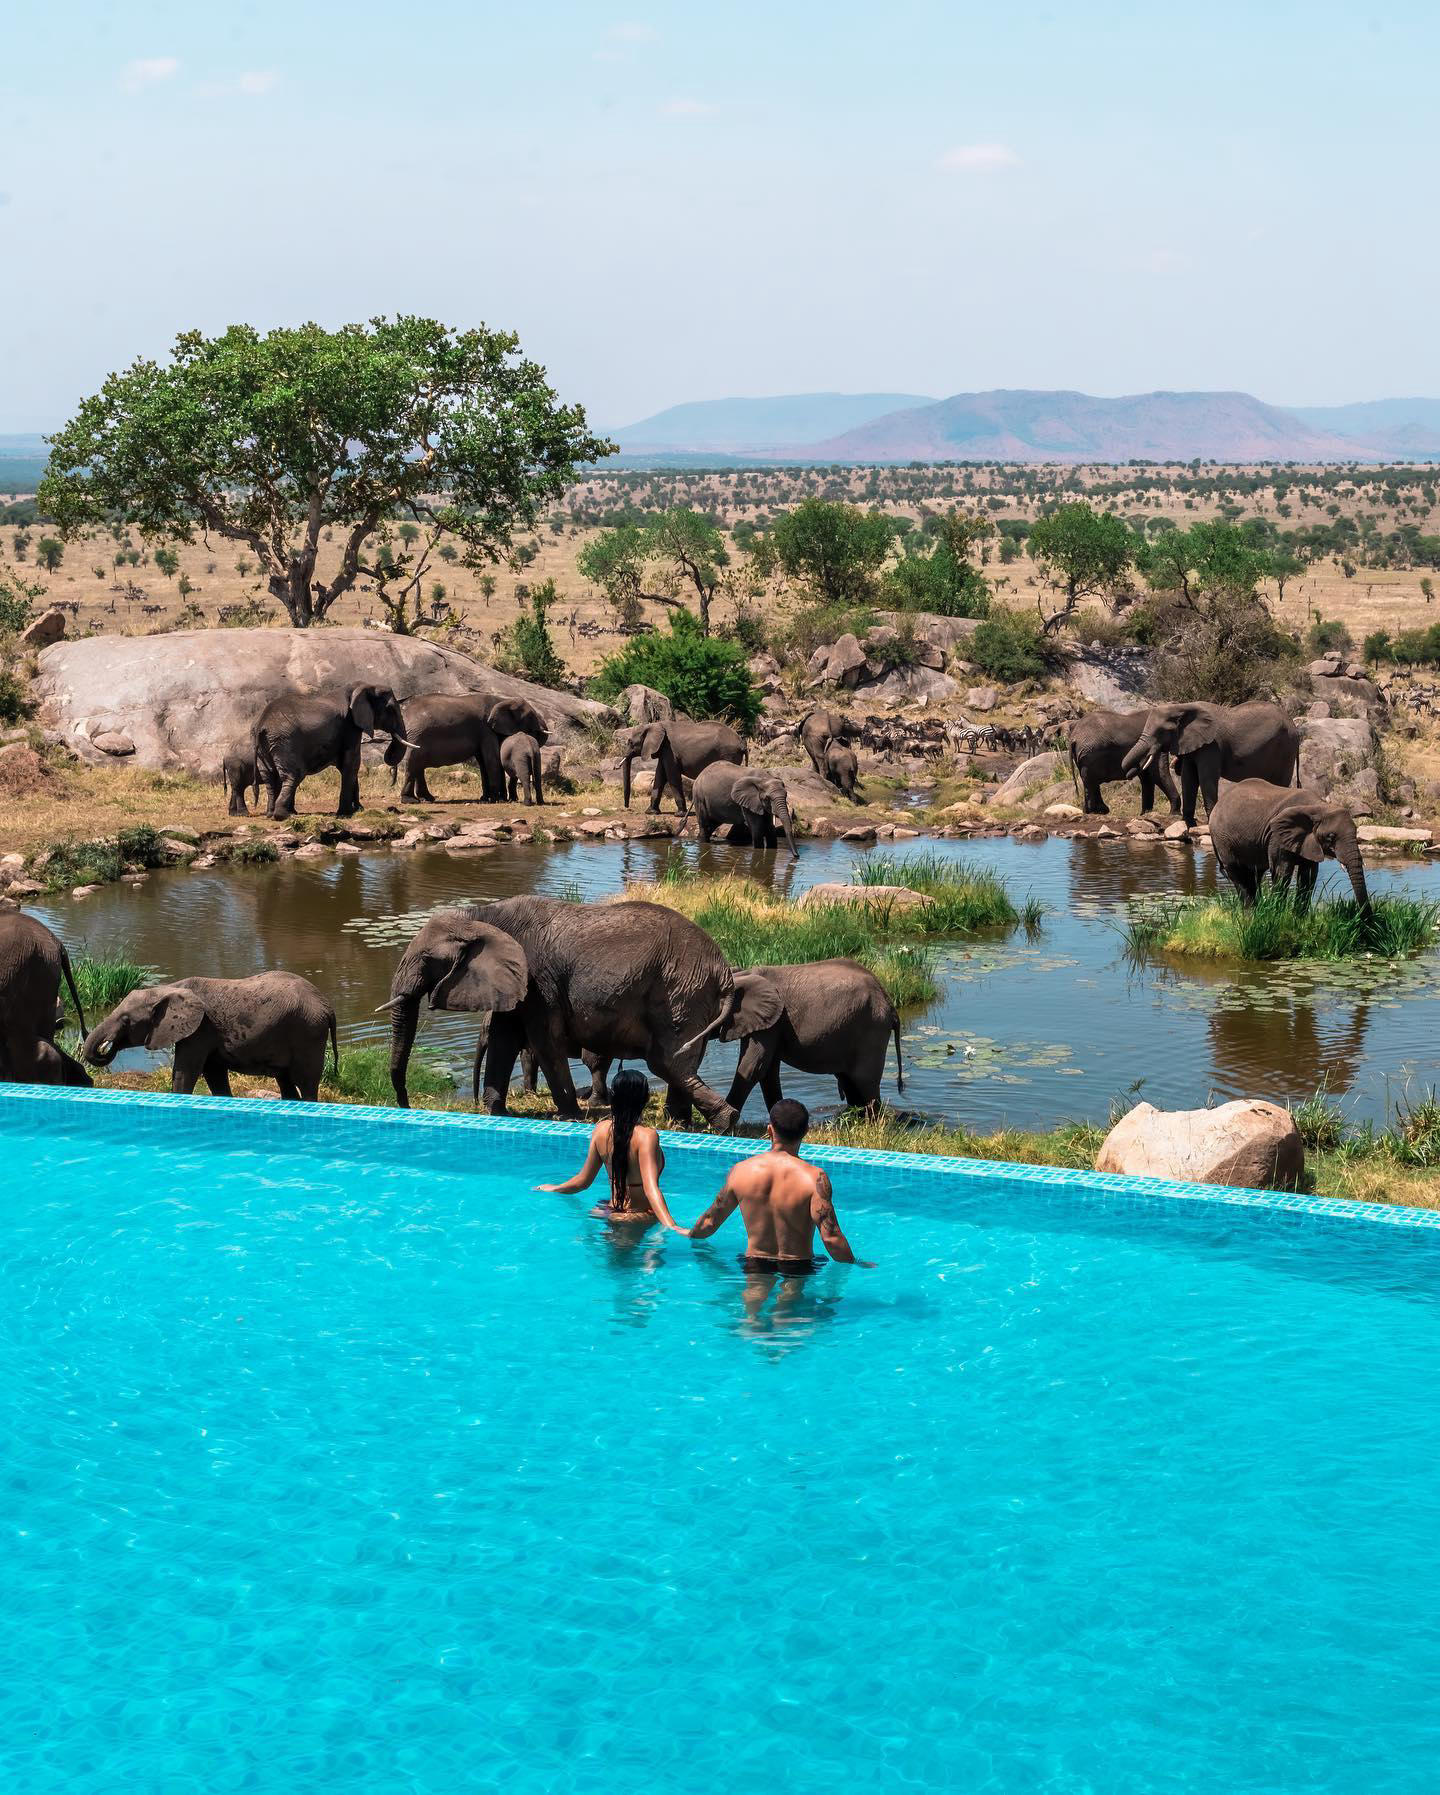 Taking bucket-list to a new level on safari in the Serengeti